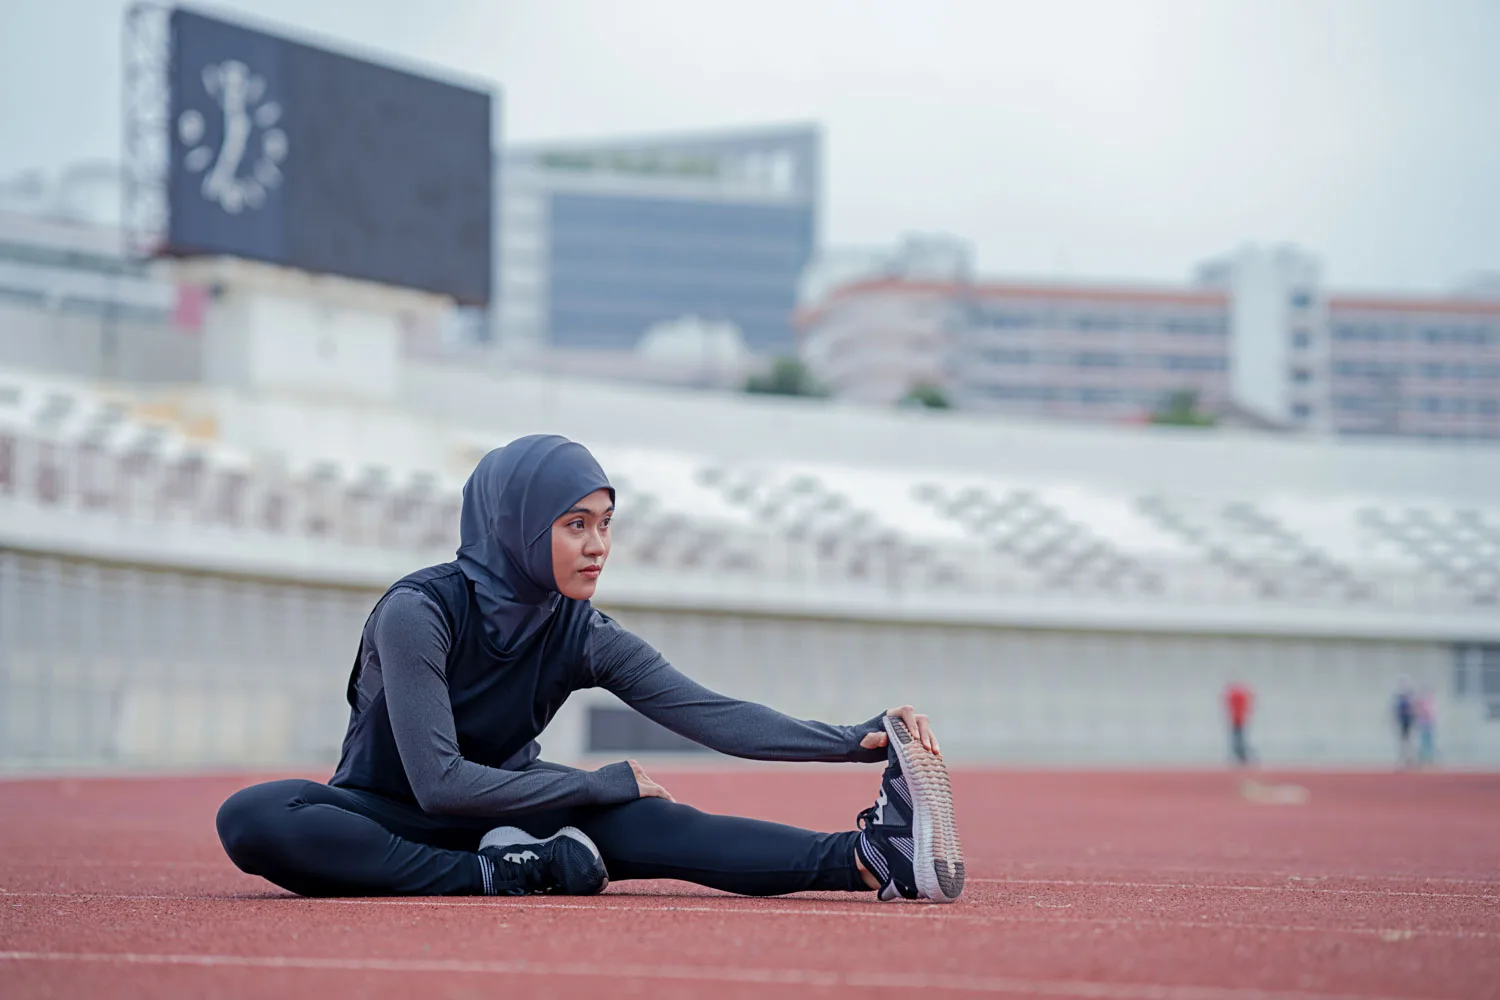 Female Muslim athlete stretches on the track while sitting down wearing a Hijab